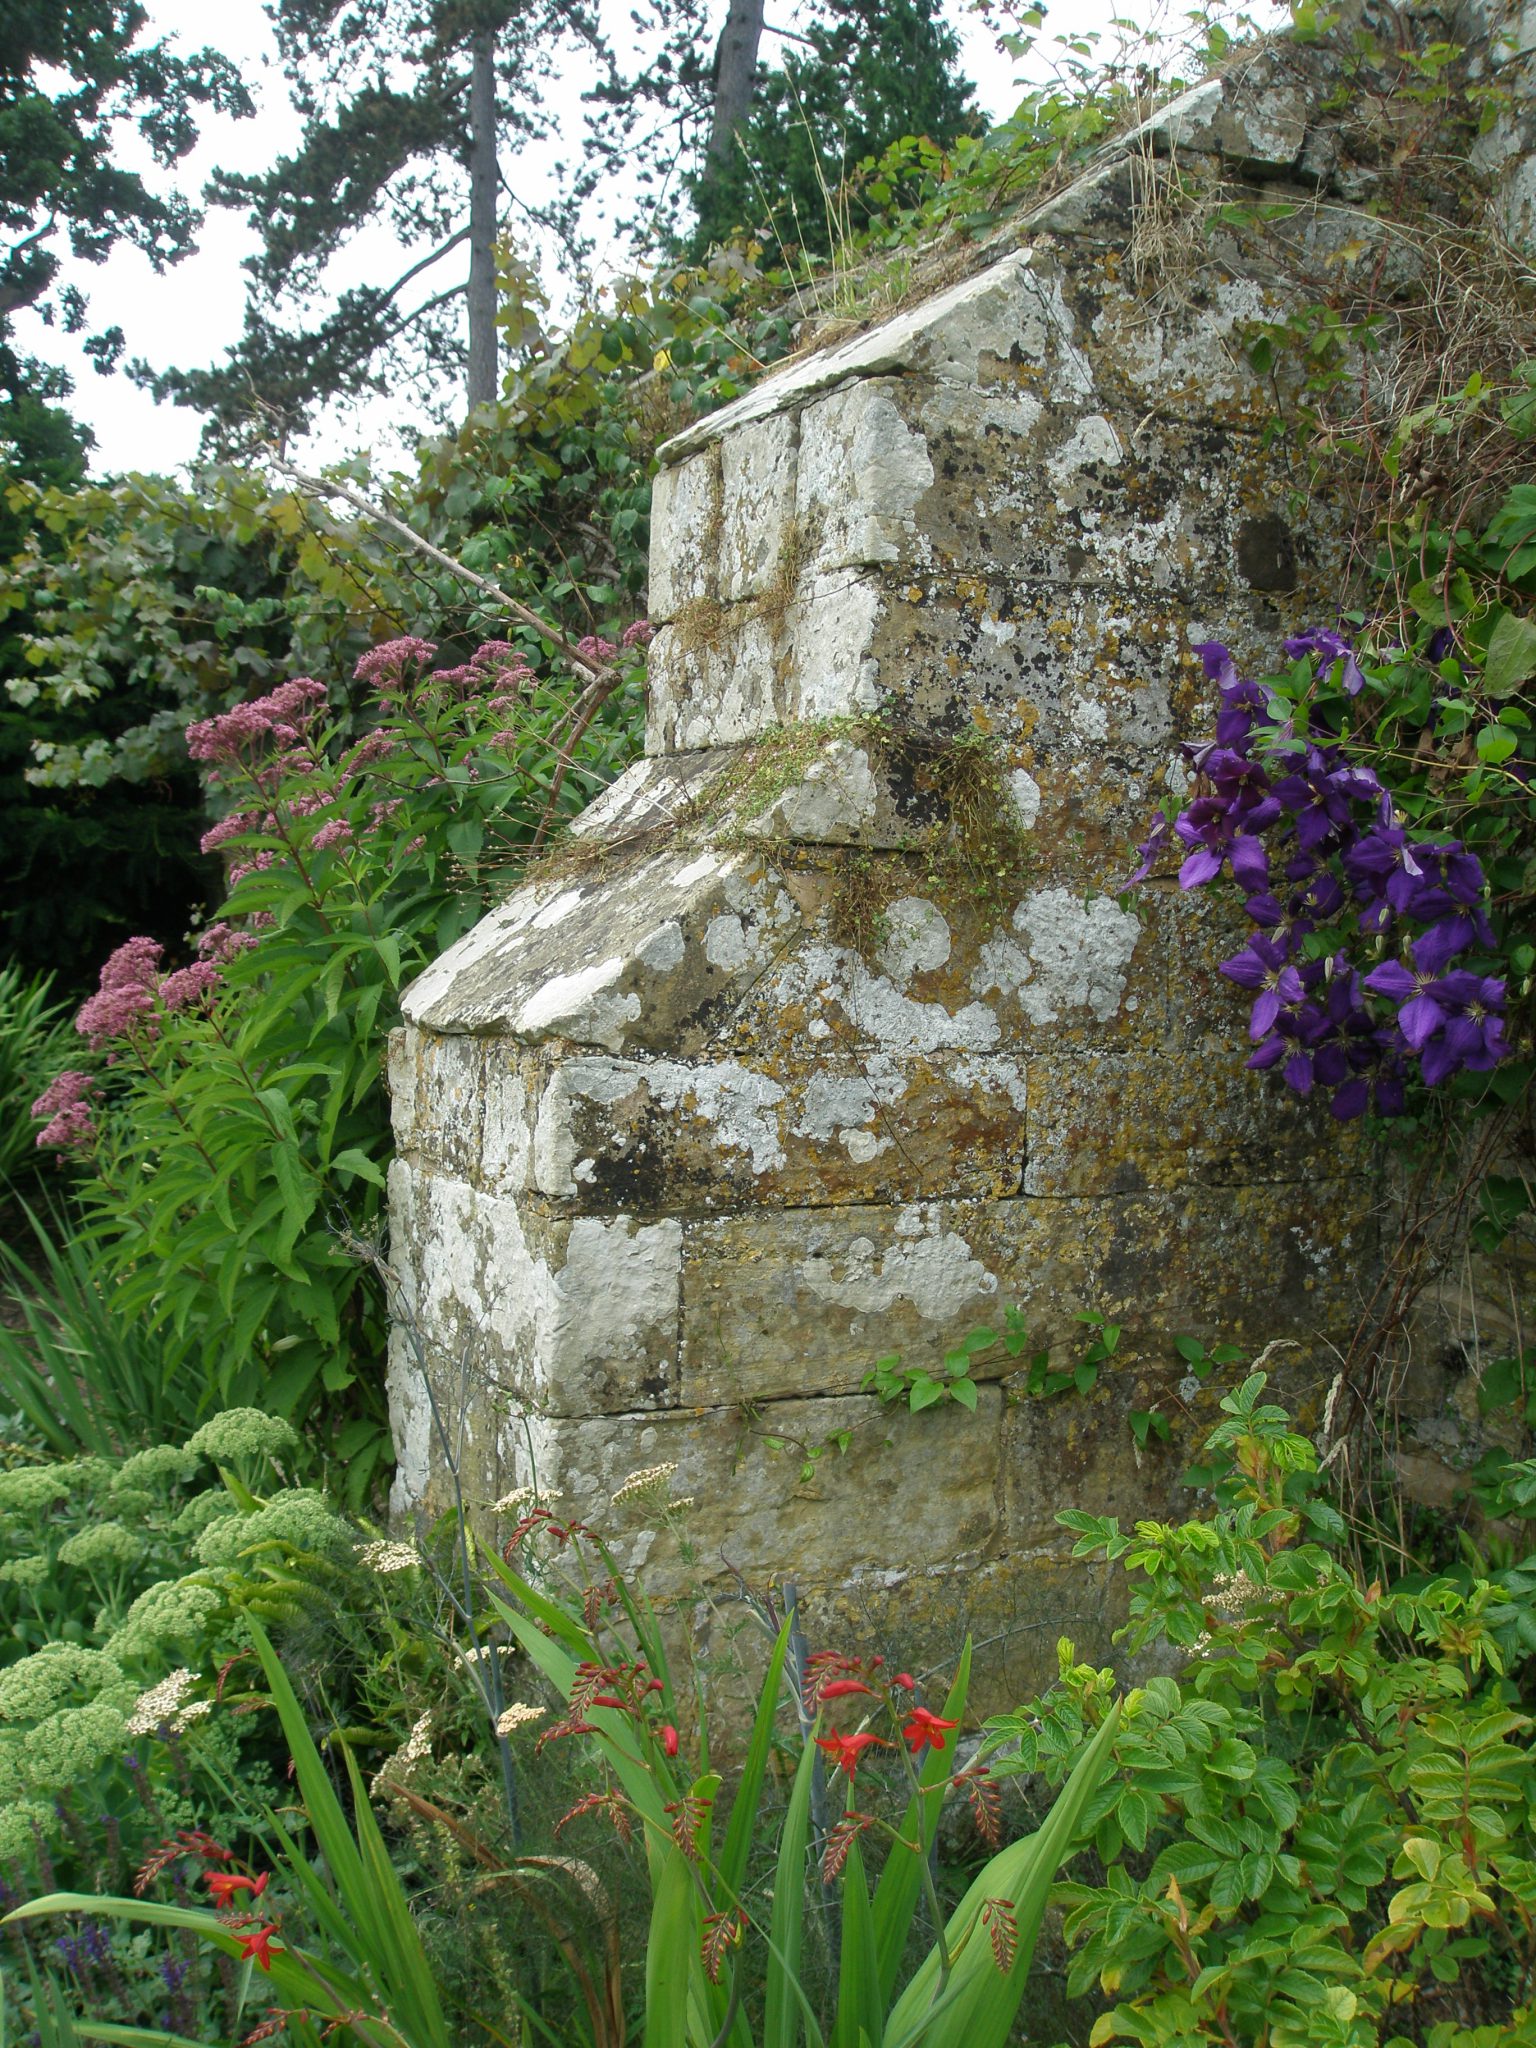 Lichen-covered stone, of a garden wall's buttress.